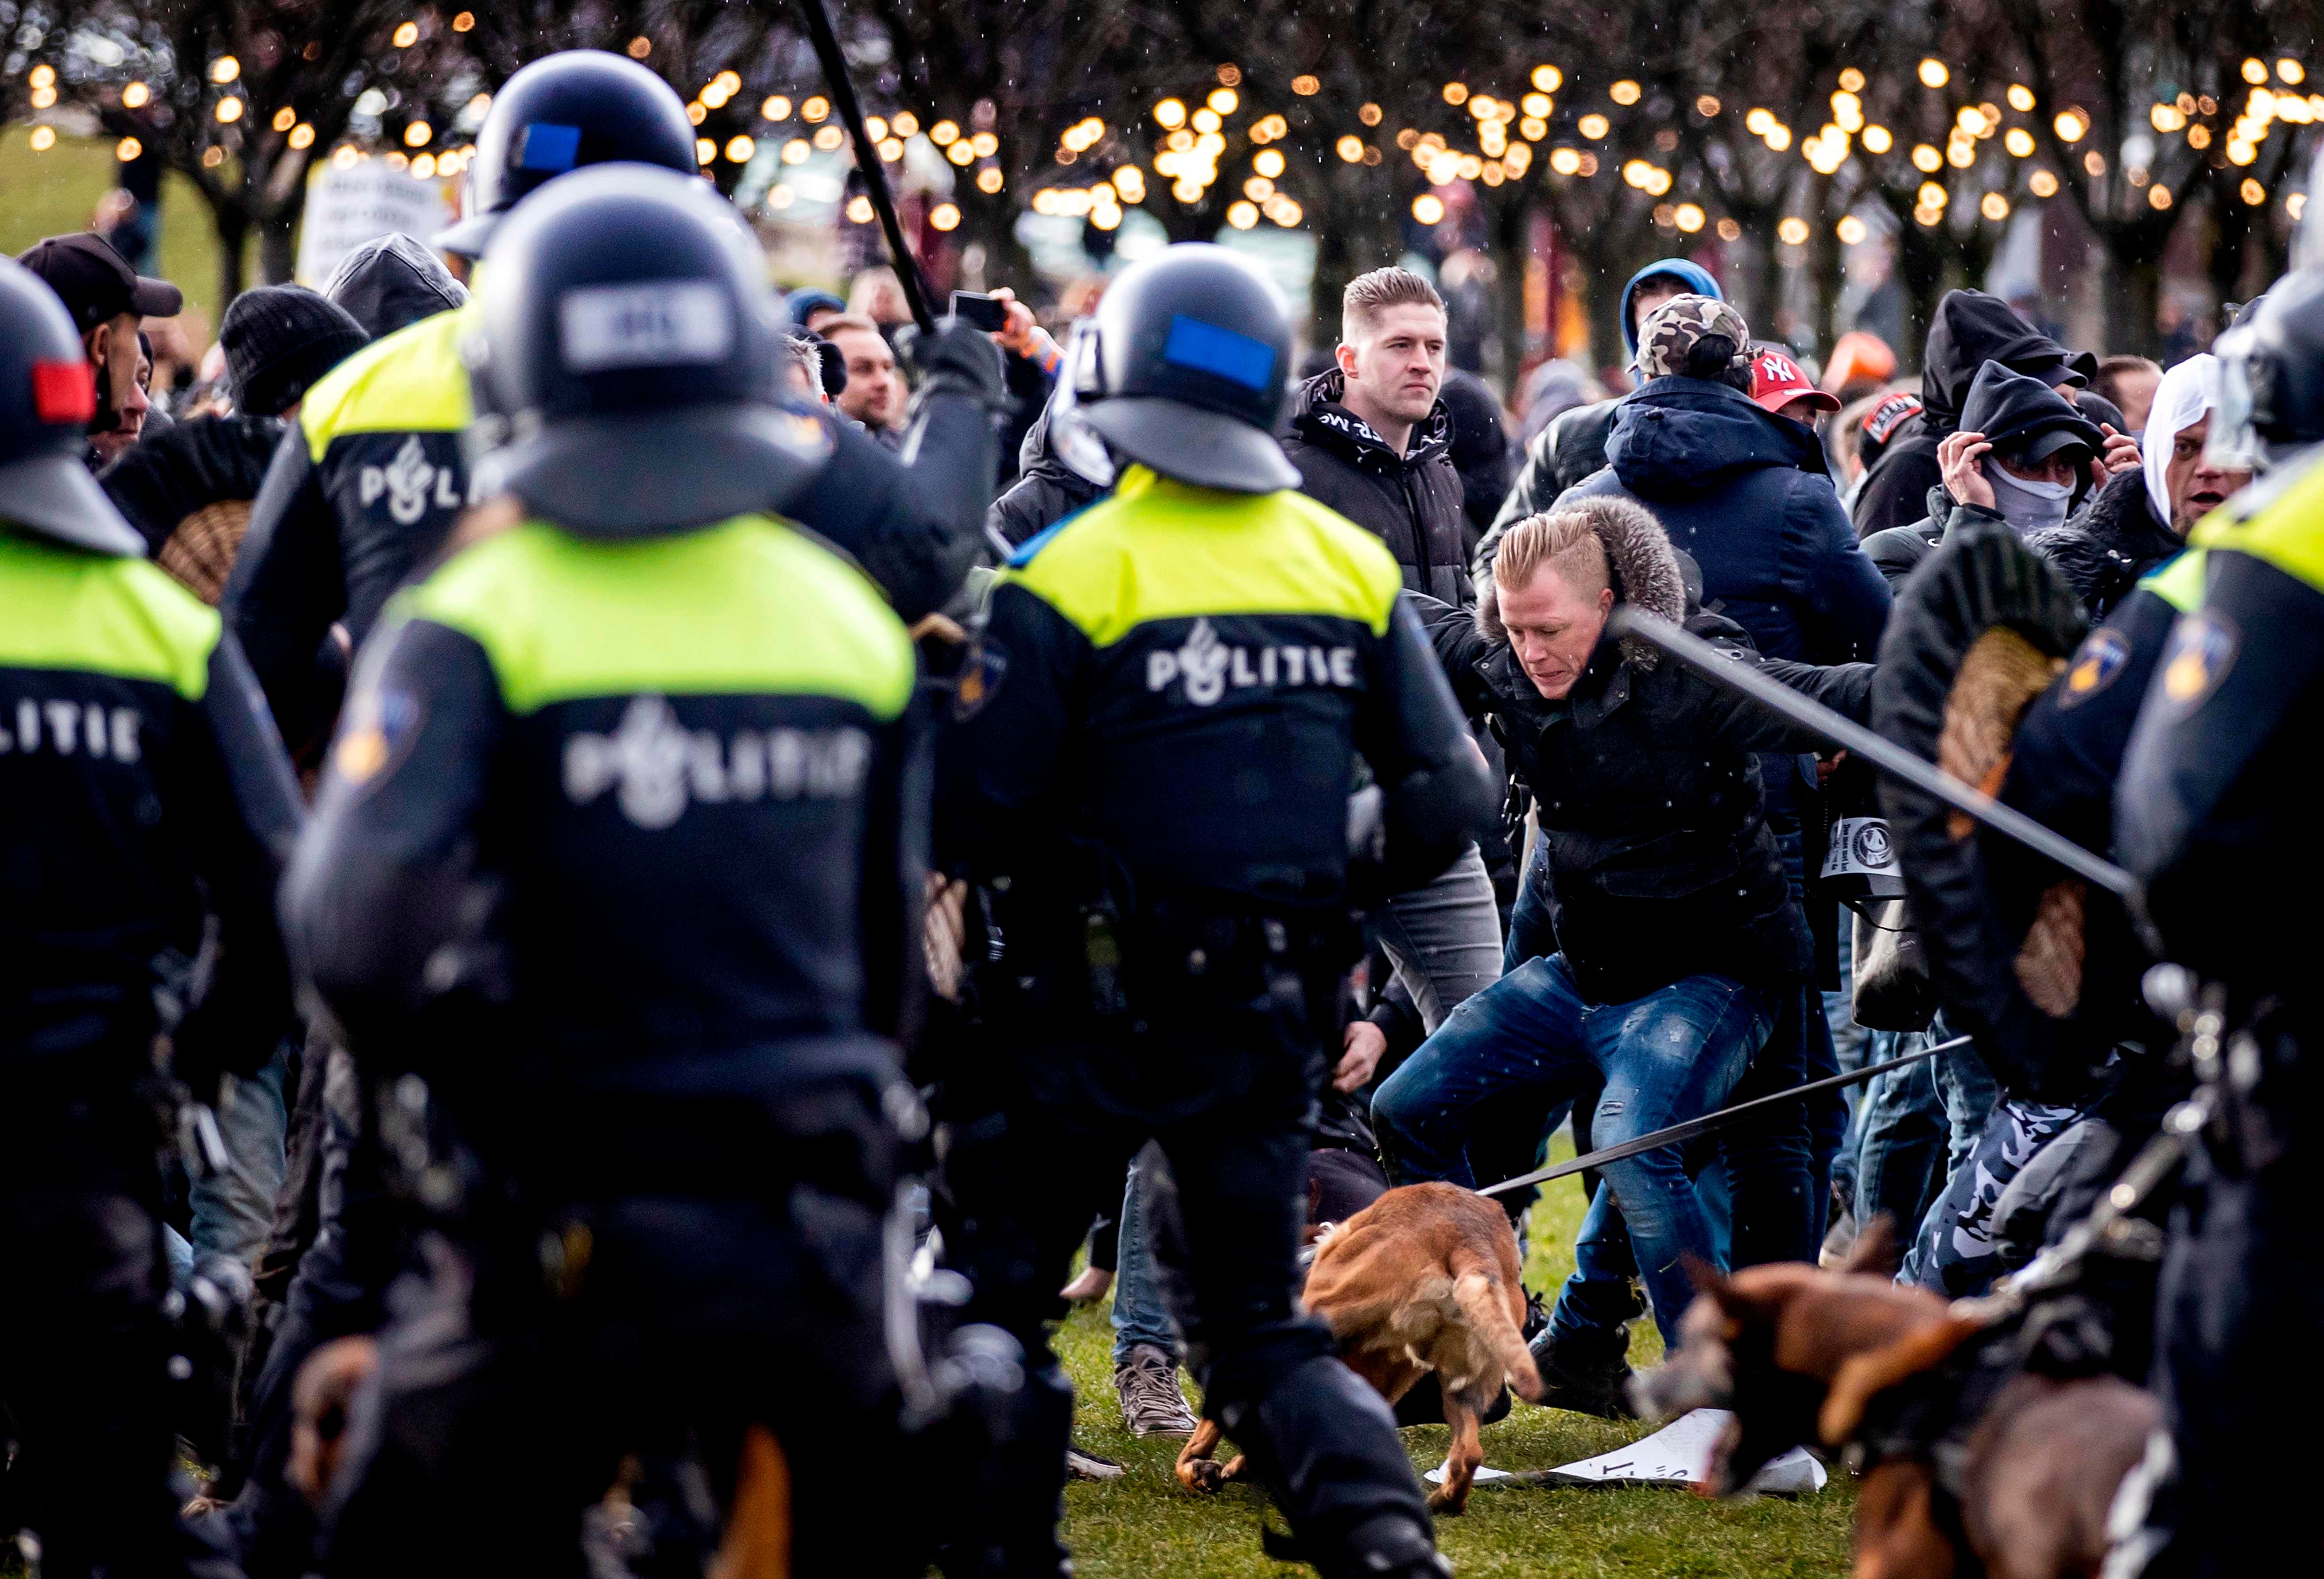 Demonstrators face Dutch police at the Museumplein, in Amsterdam, on January 17, 2021